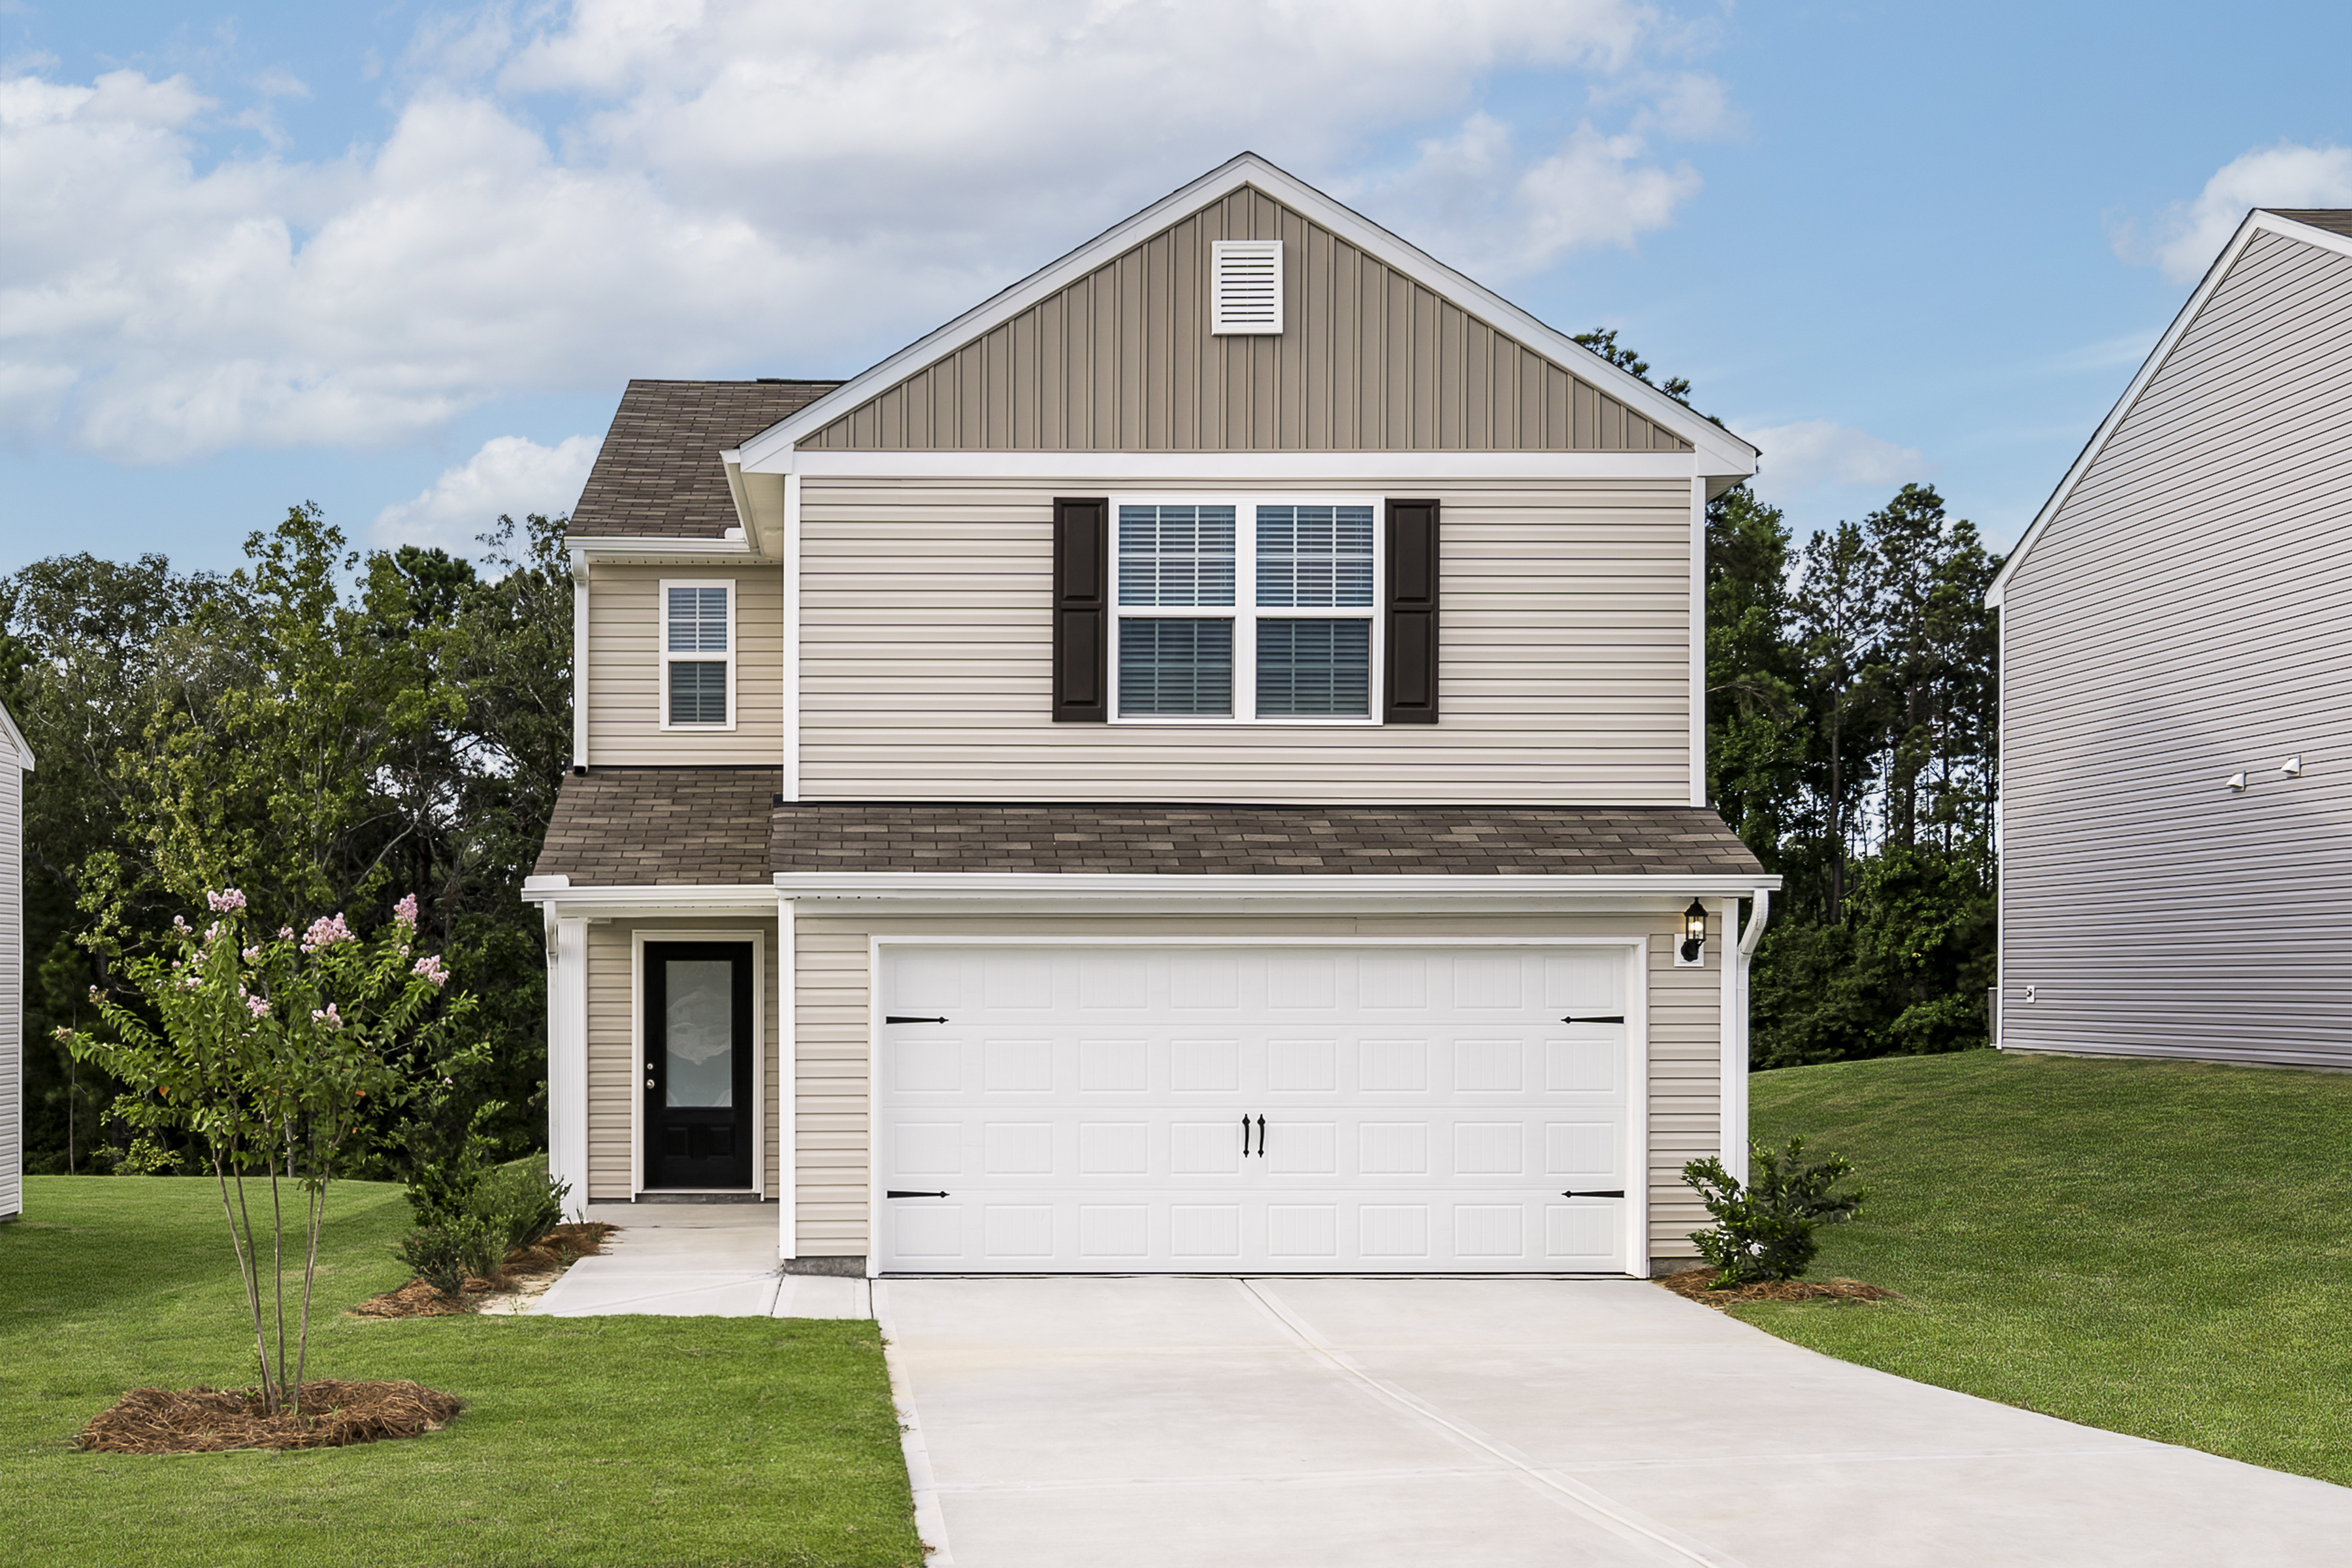 LGI Homes Opens New Community in the Raleigh Market